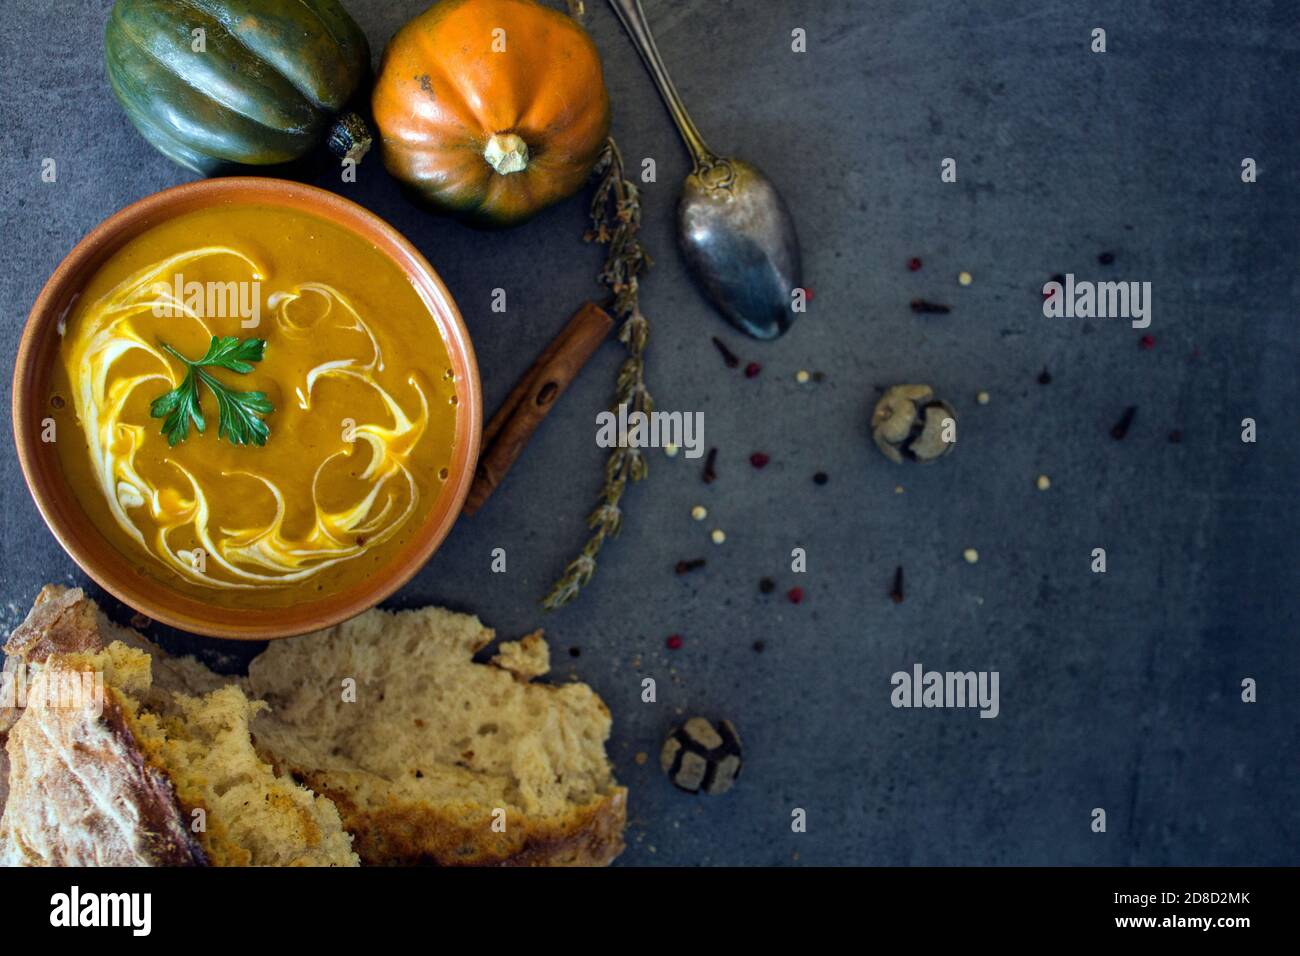 Pumpkin soup with fresh baked bread and silver spoon on gray table. Top view photo of vegan meal. Healthy eating concept. Stock Photo